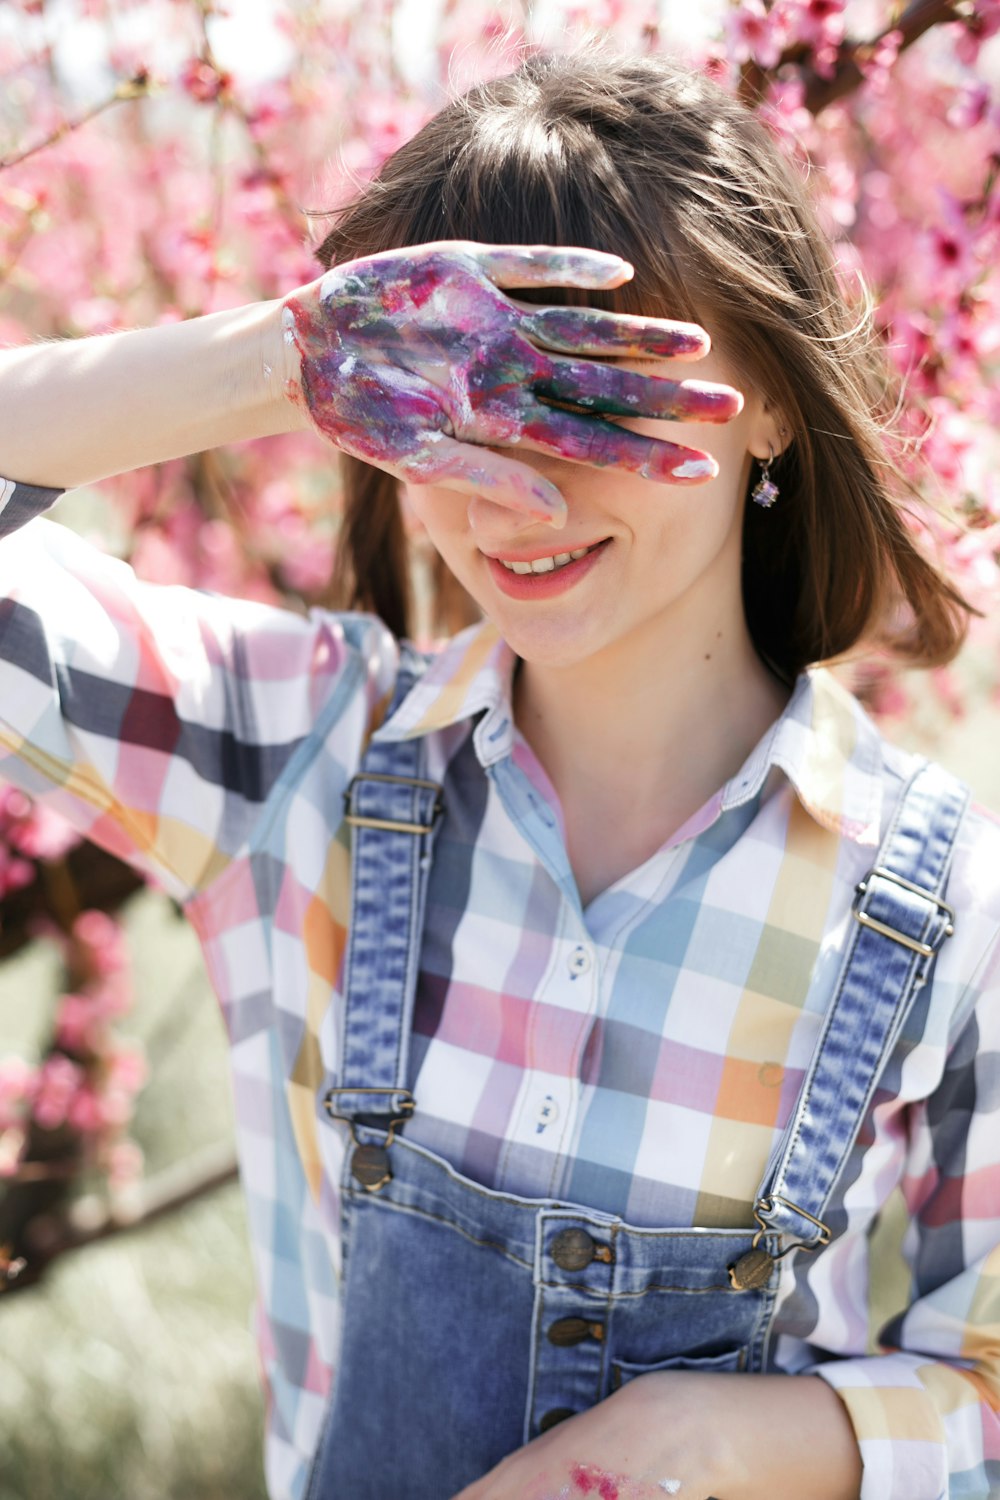 a woman wearing overalls and a checkered shirt is looking through a pair of